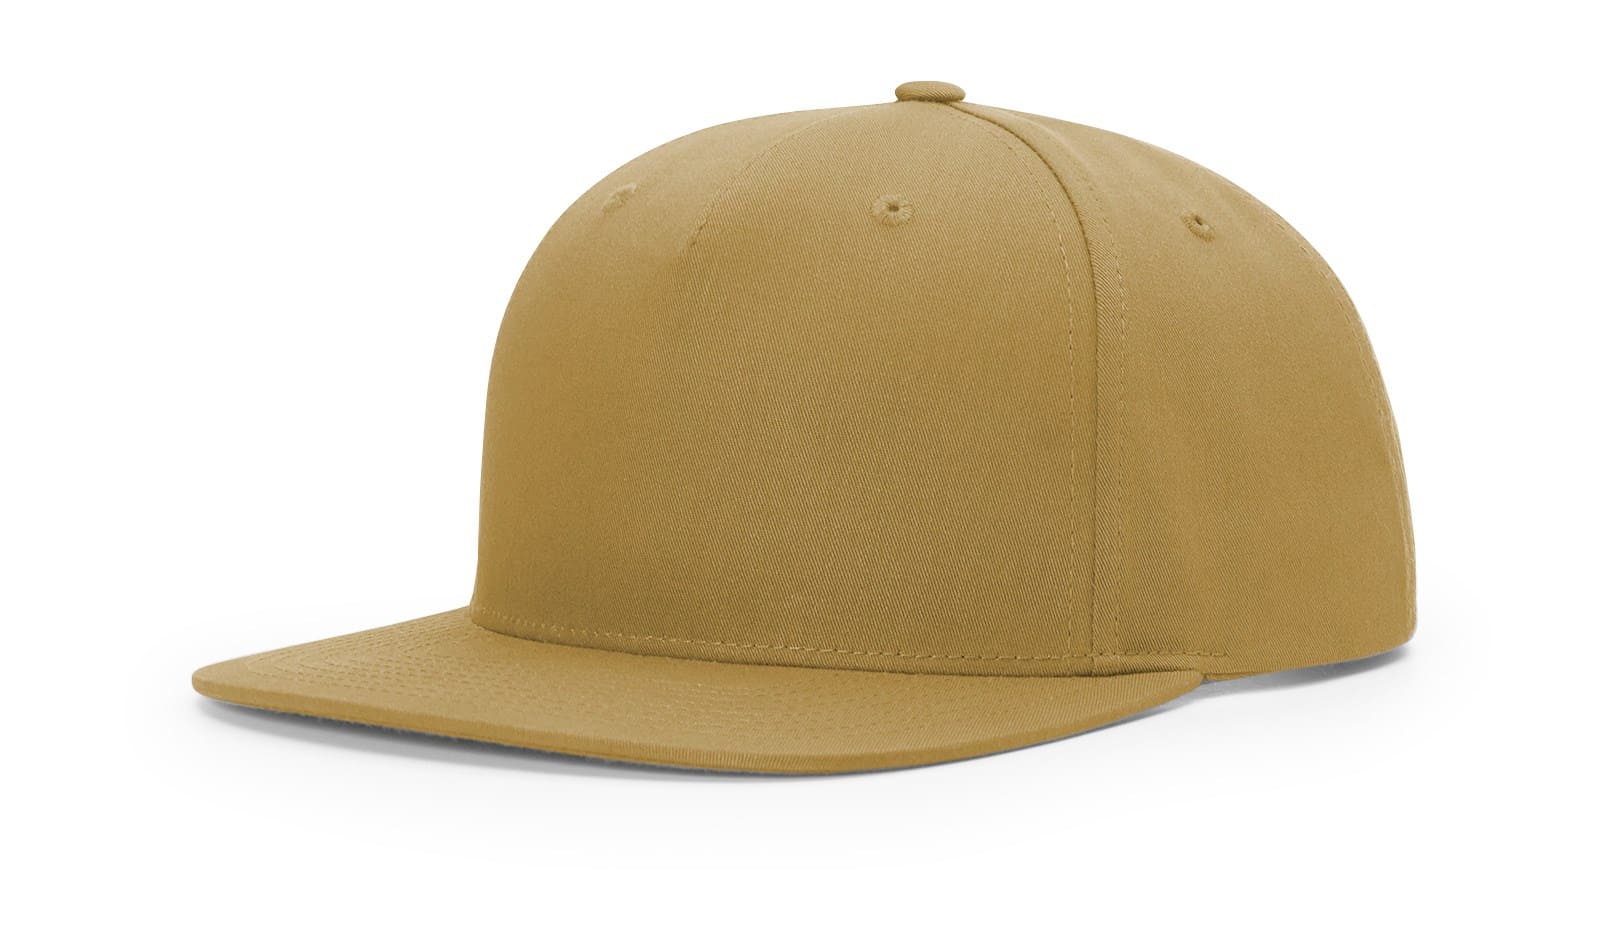 TOPONE ACCESSORIES LIMITED Custom 5 Panel Pinch Front Structured Snapback Topone Accessories Ltd. 